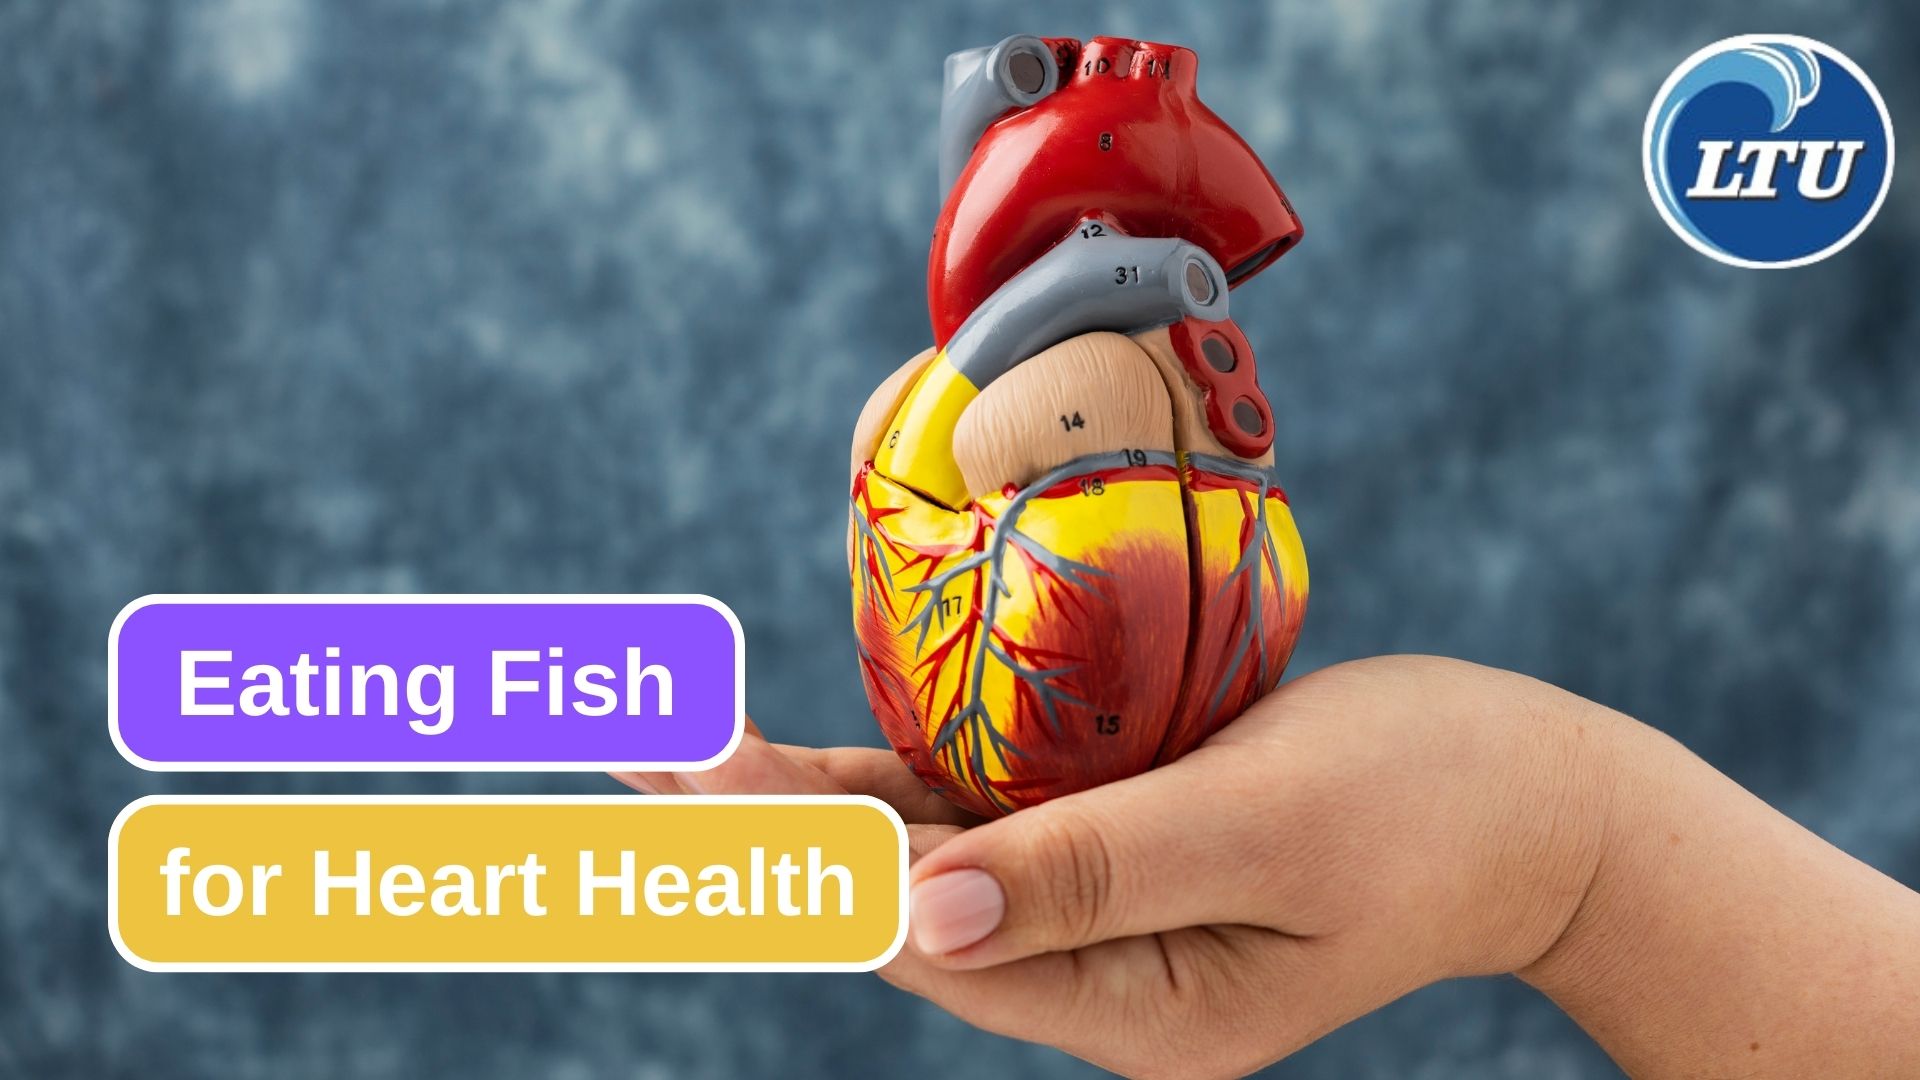 9 Benefits You Can Get from Eating Fish for Your Heart